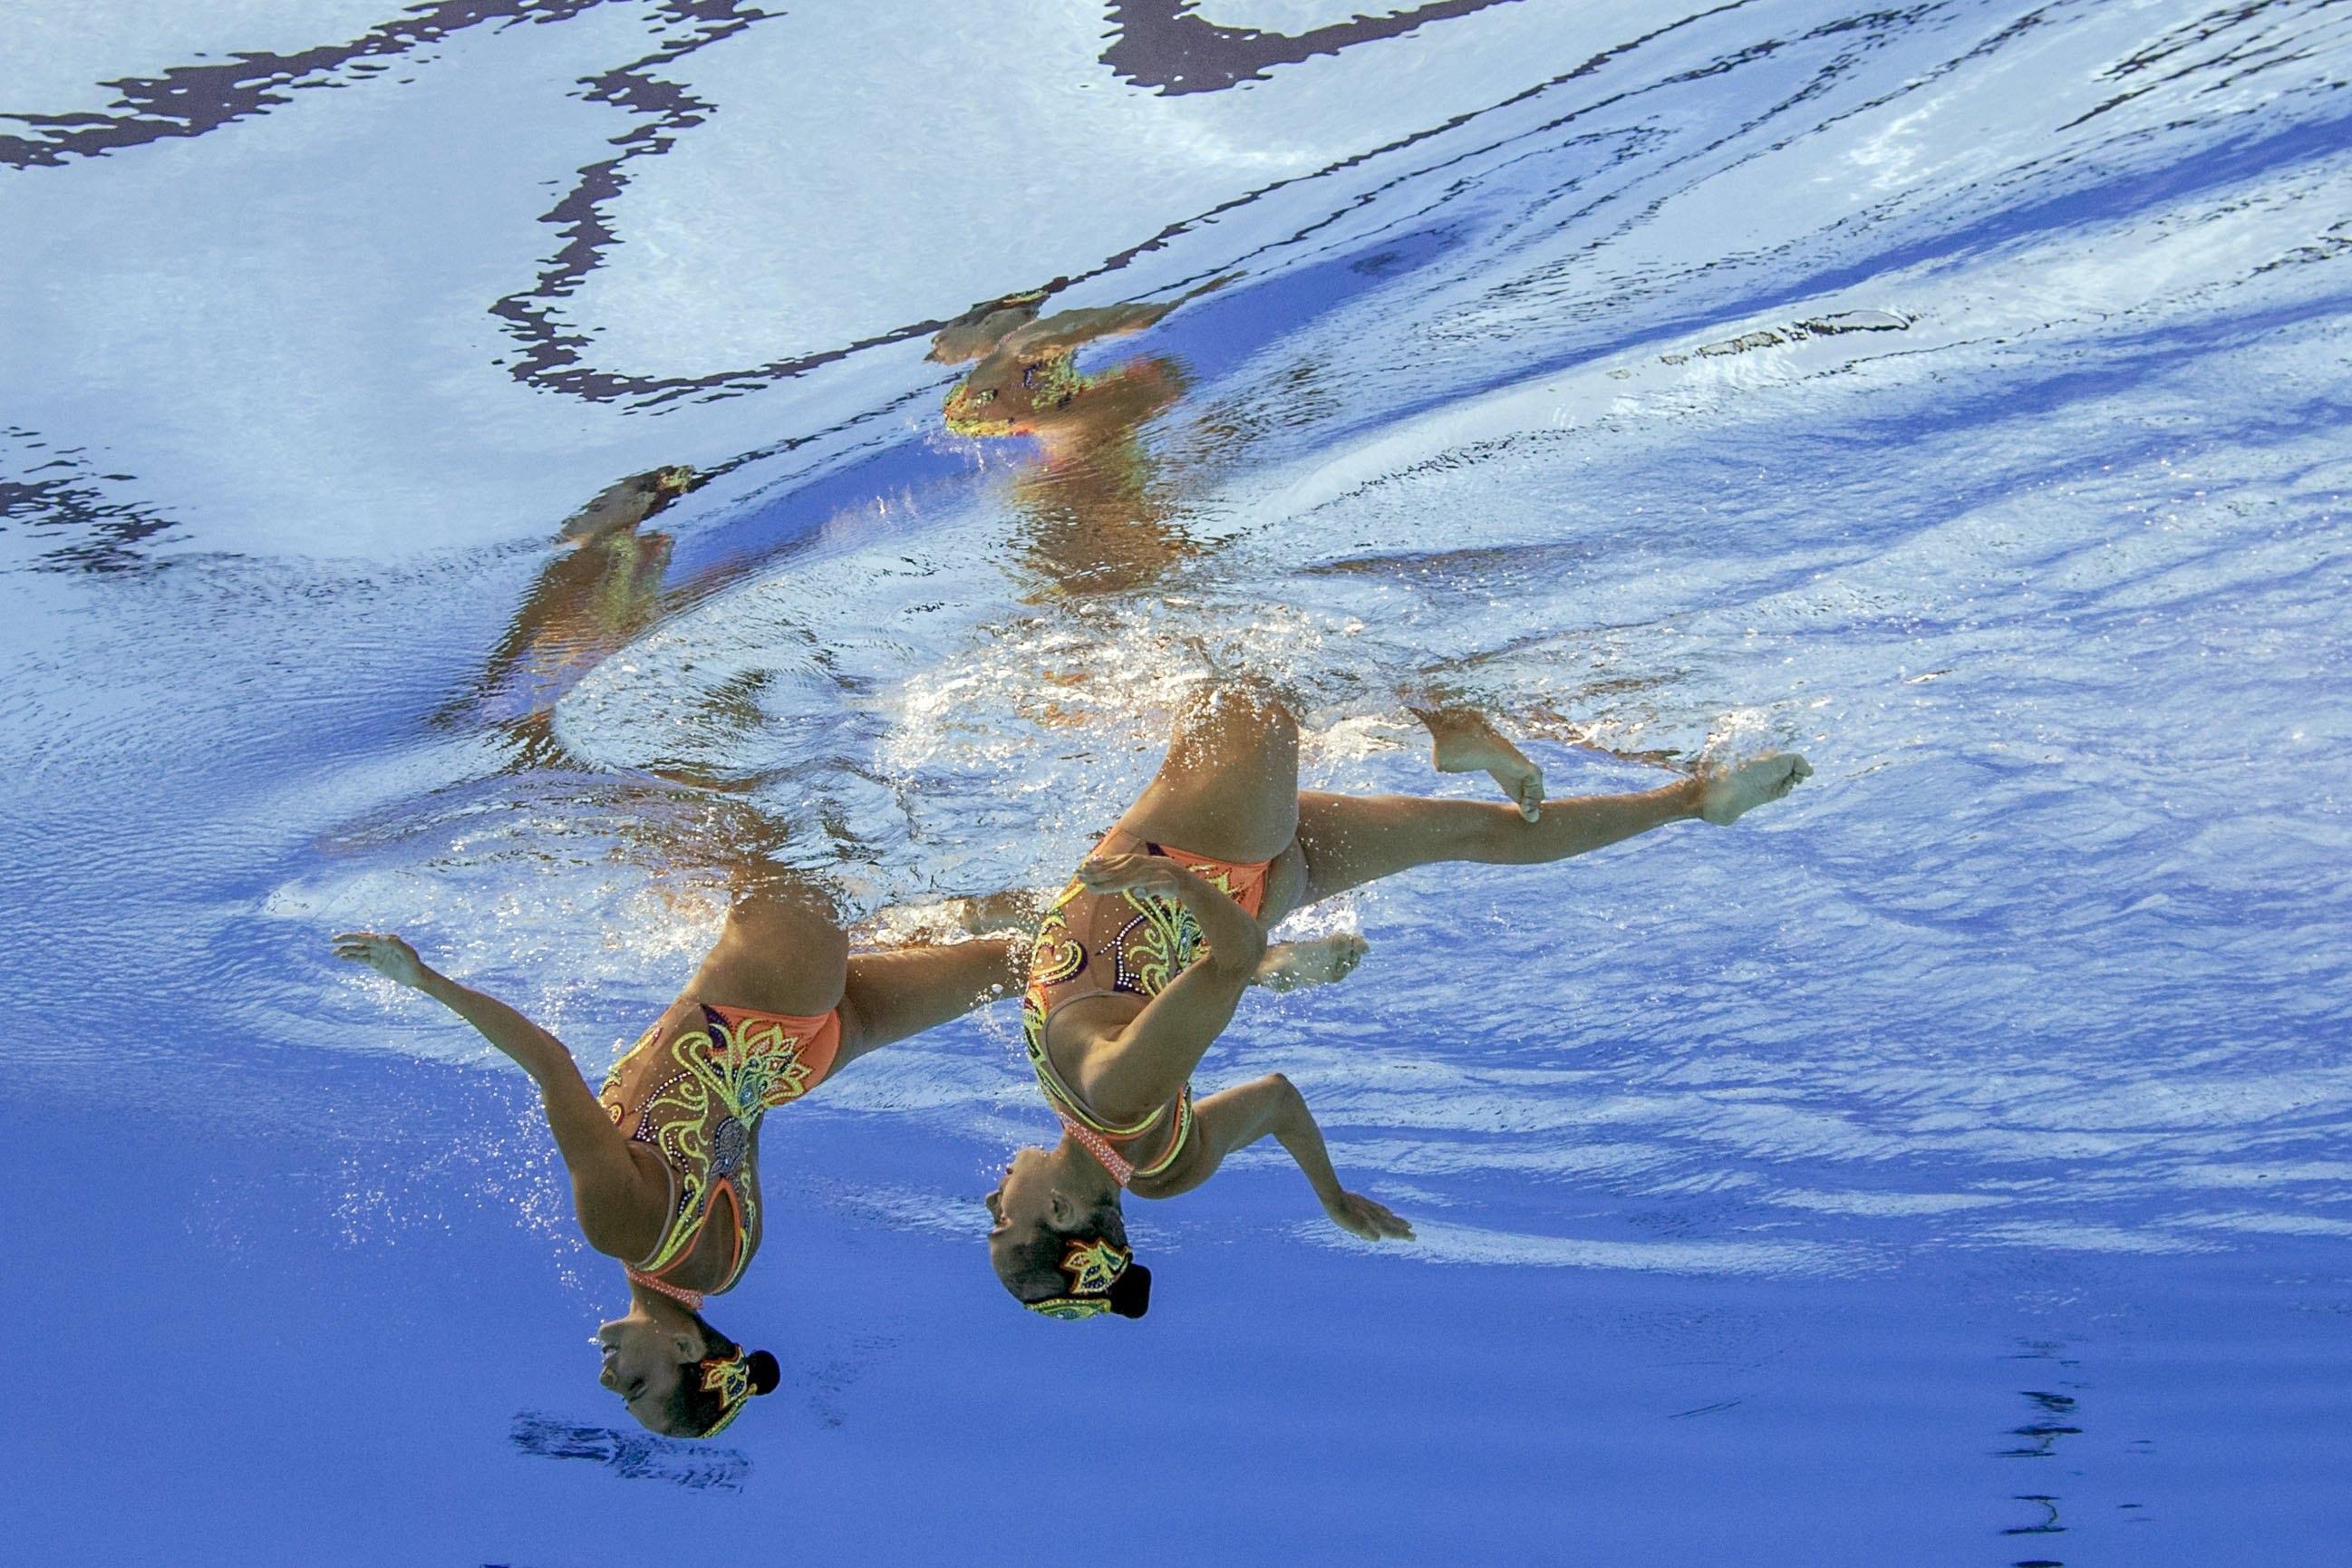 epa06087455 Karem Achach Ramirez and Nuria Lidon Diosdado Garcia of Mexico perform during the Women's Duet Technical Synchronized Swimming Preliminary Technical Routine of the FINA World Championships 2017 in Budapest, Hungary, 14 July 2017.  EPA/PATRICK B. KRAEMER